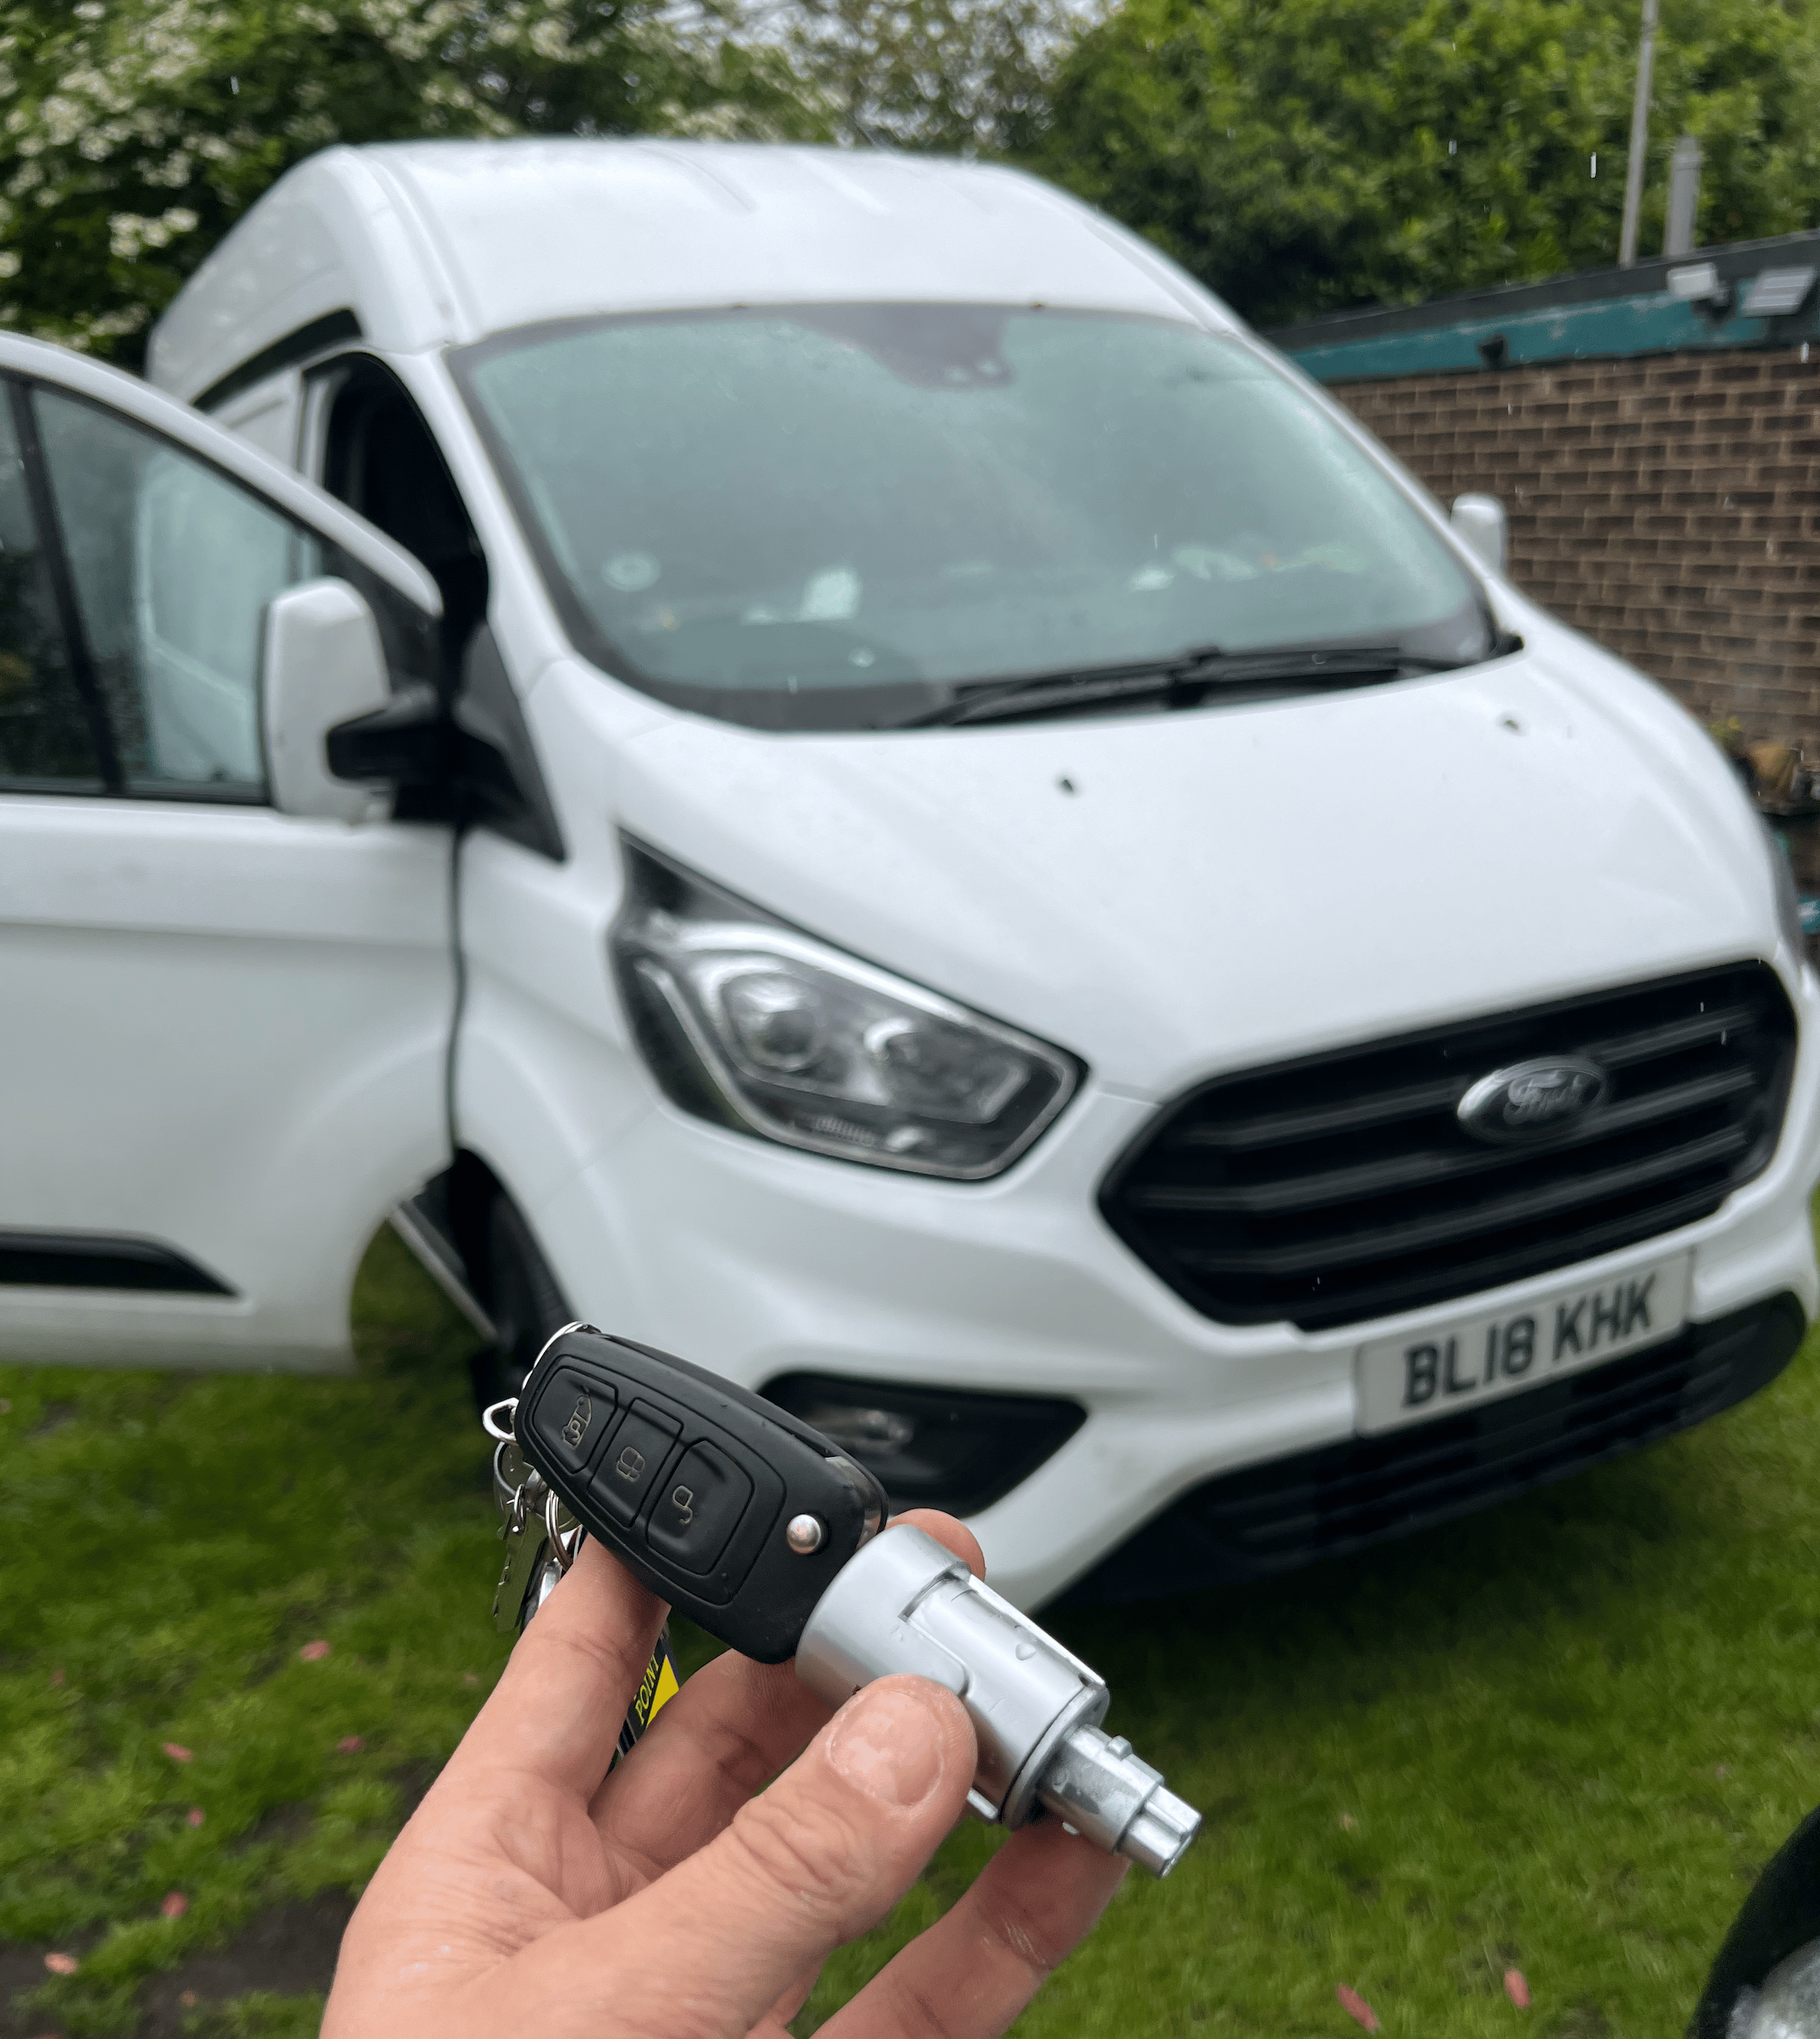 Key Becoming Hard to Turn in Ford Ignition